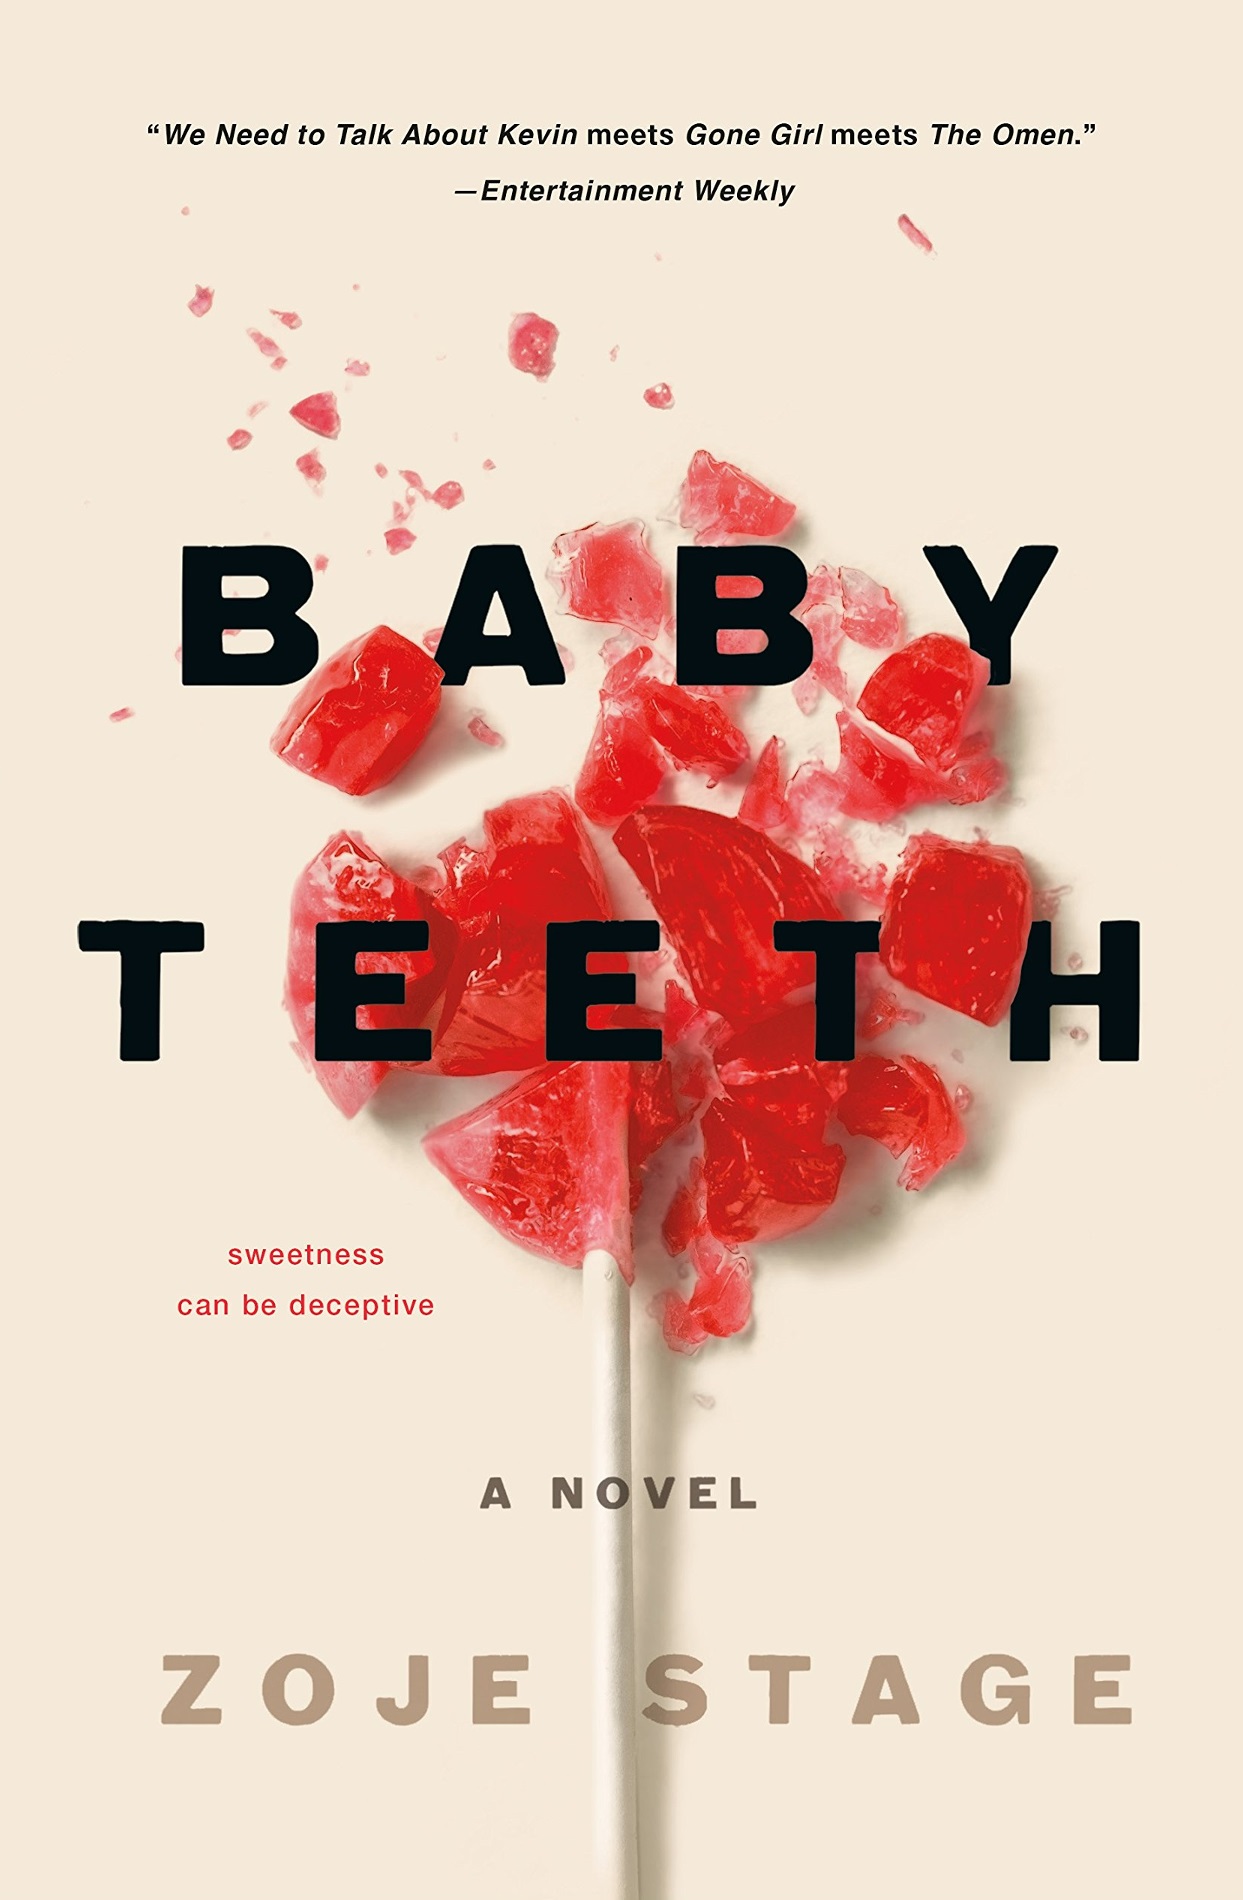 5. Baby Teeth by Zoje Stage